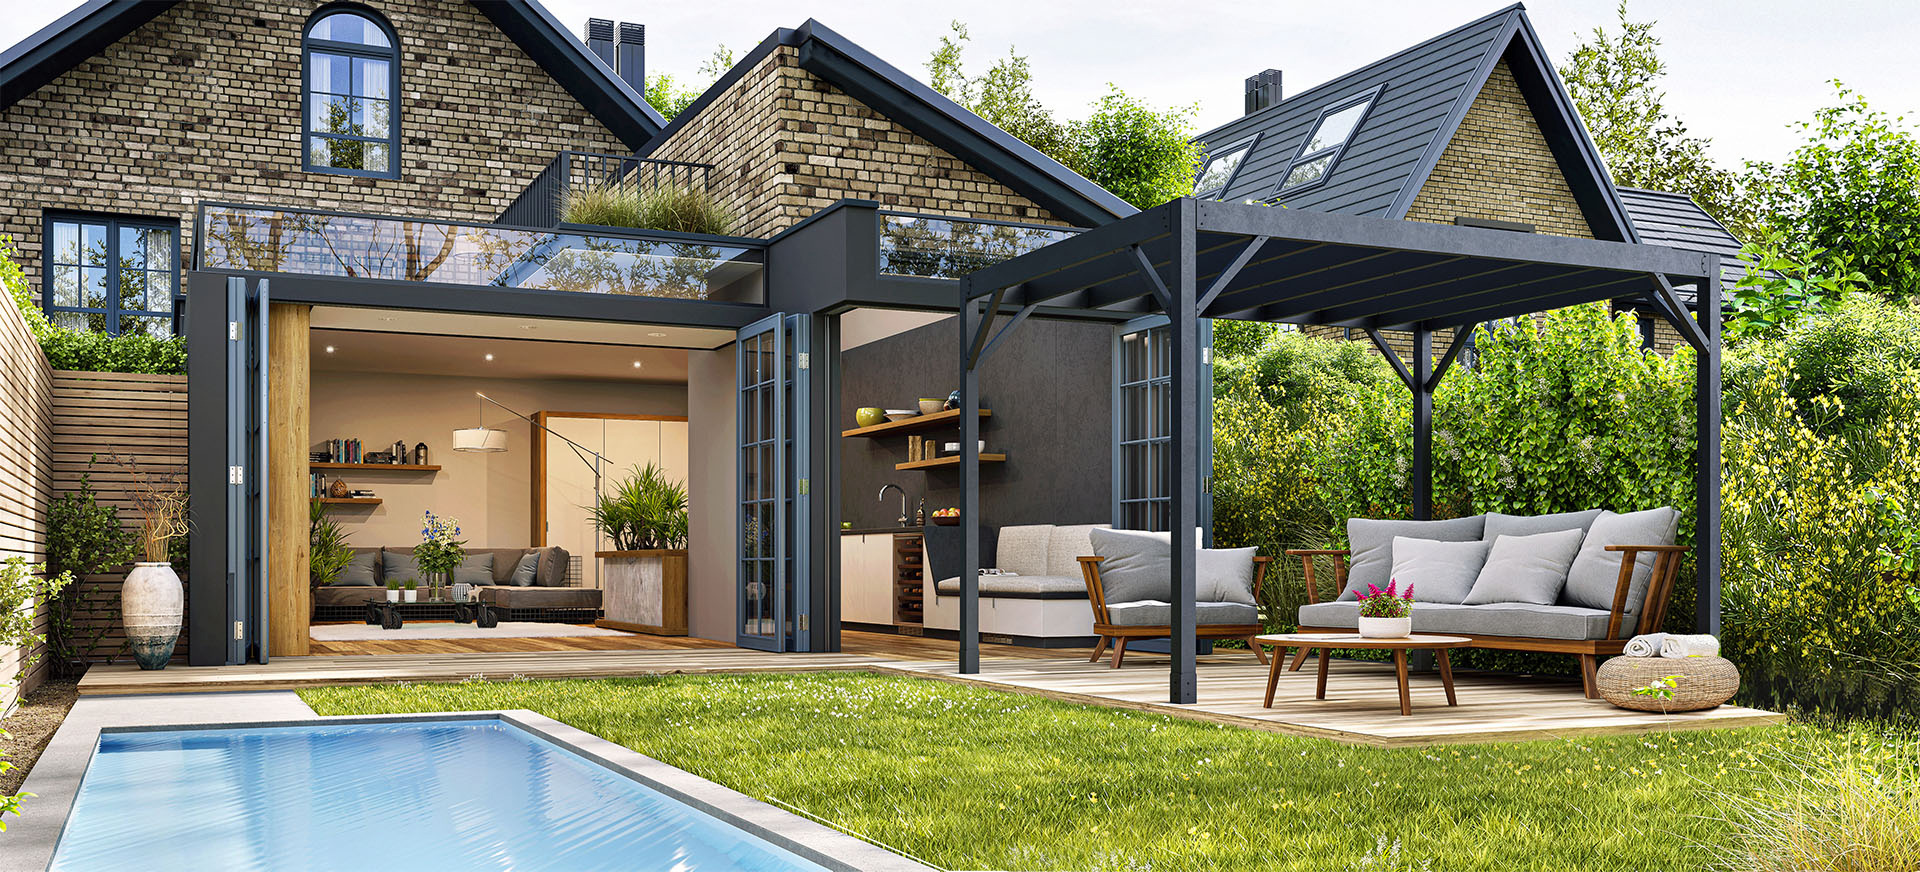 Backyard of house with metal pergola extending the outdoor living space next to a pool.